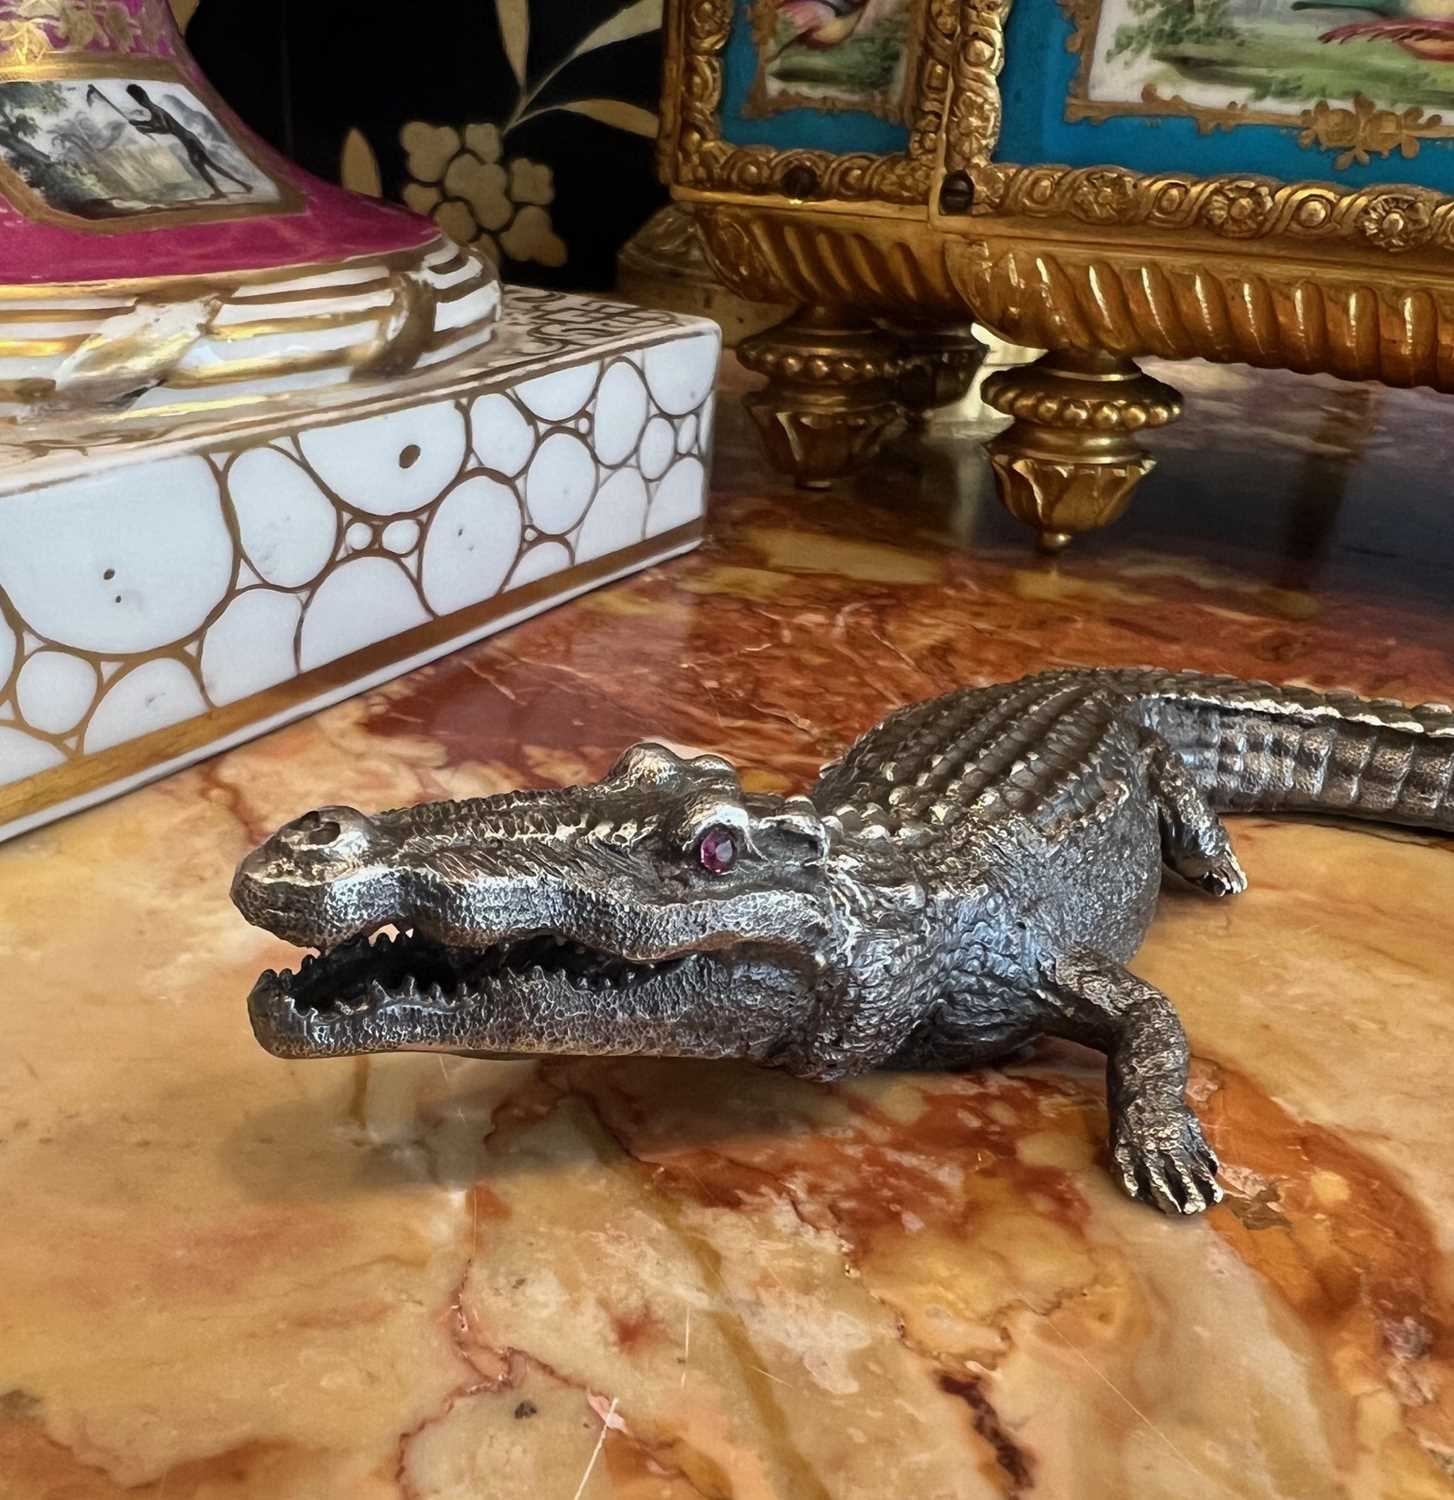 A FABERGE STYLE SOLID SILVER MODEL OF A CROCODILE - Image 5 of 10